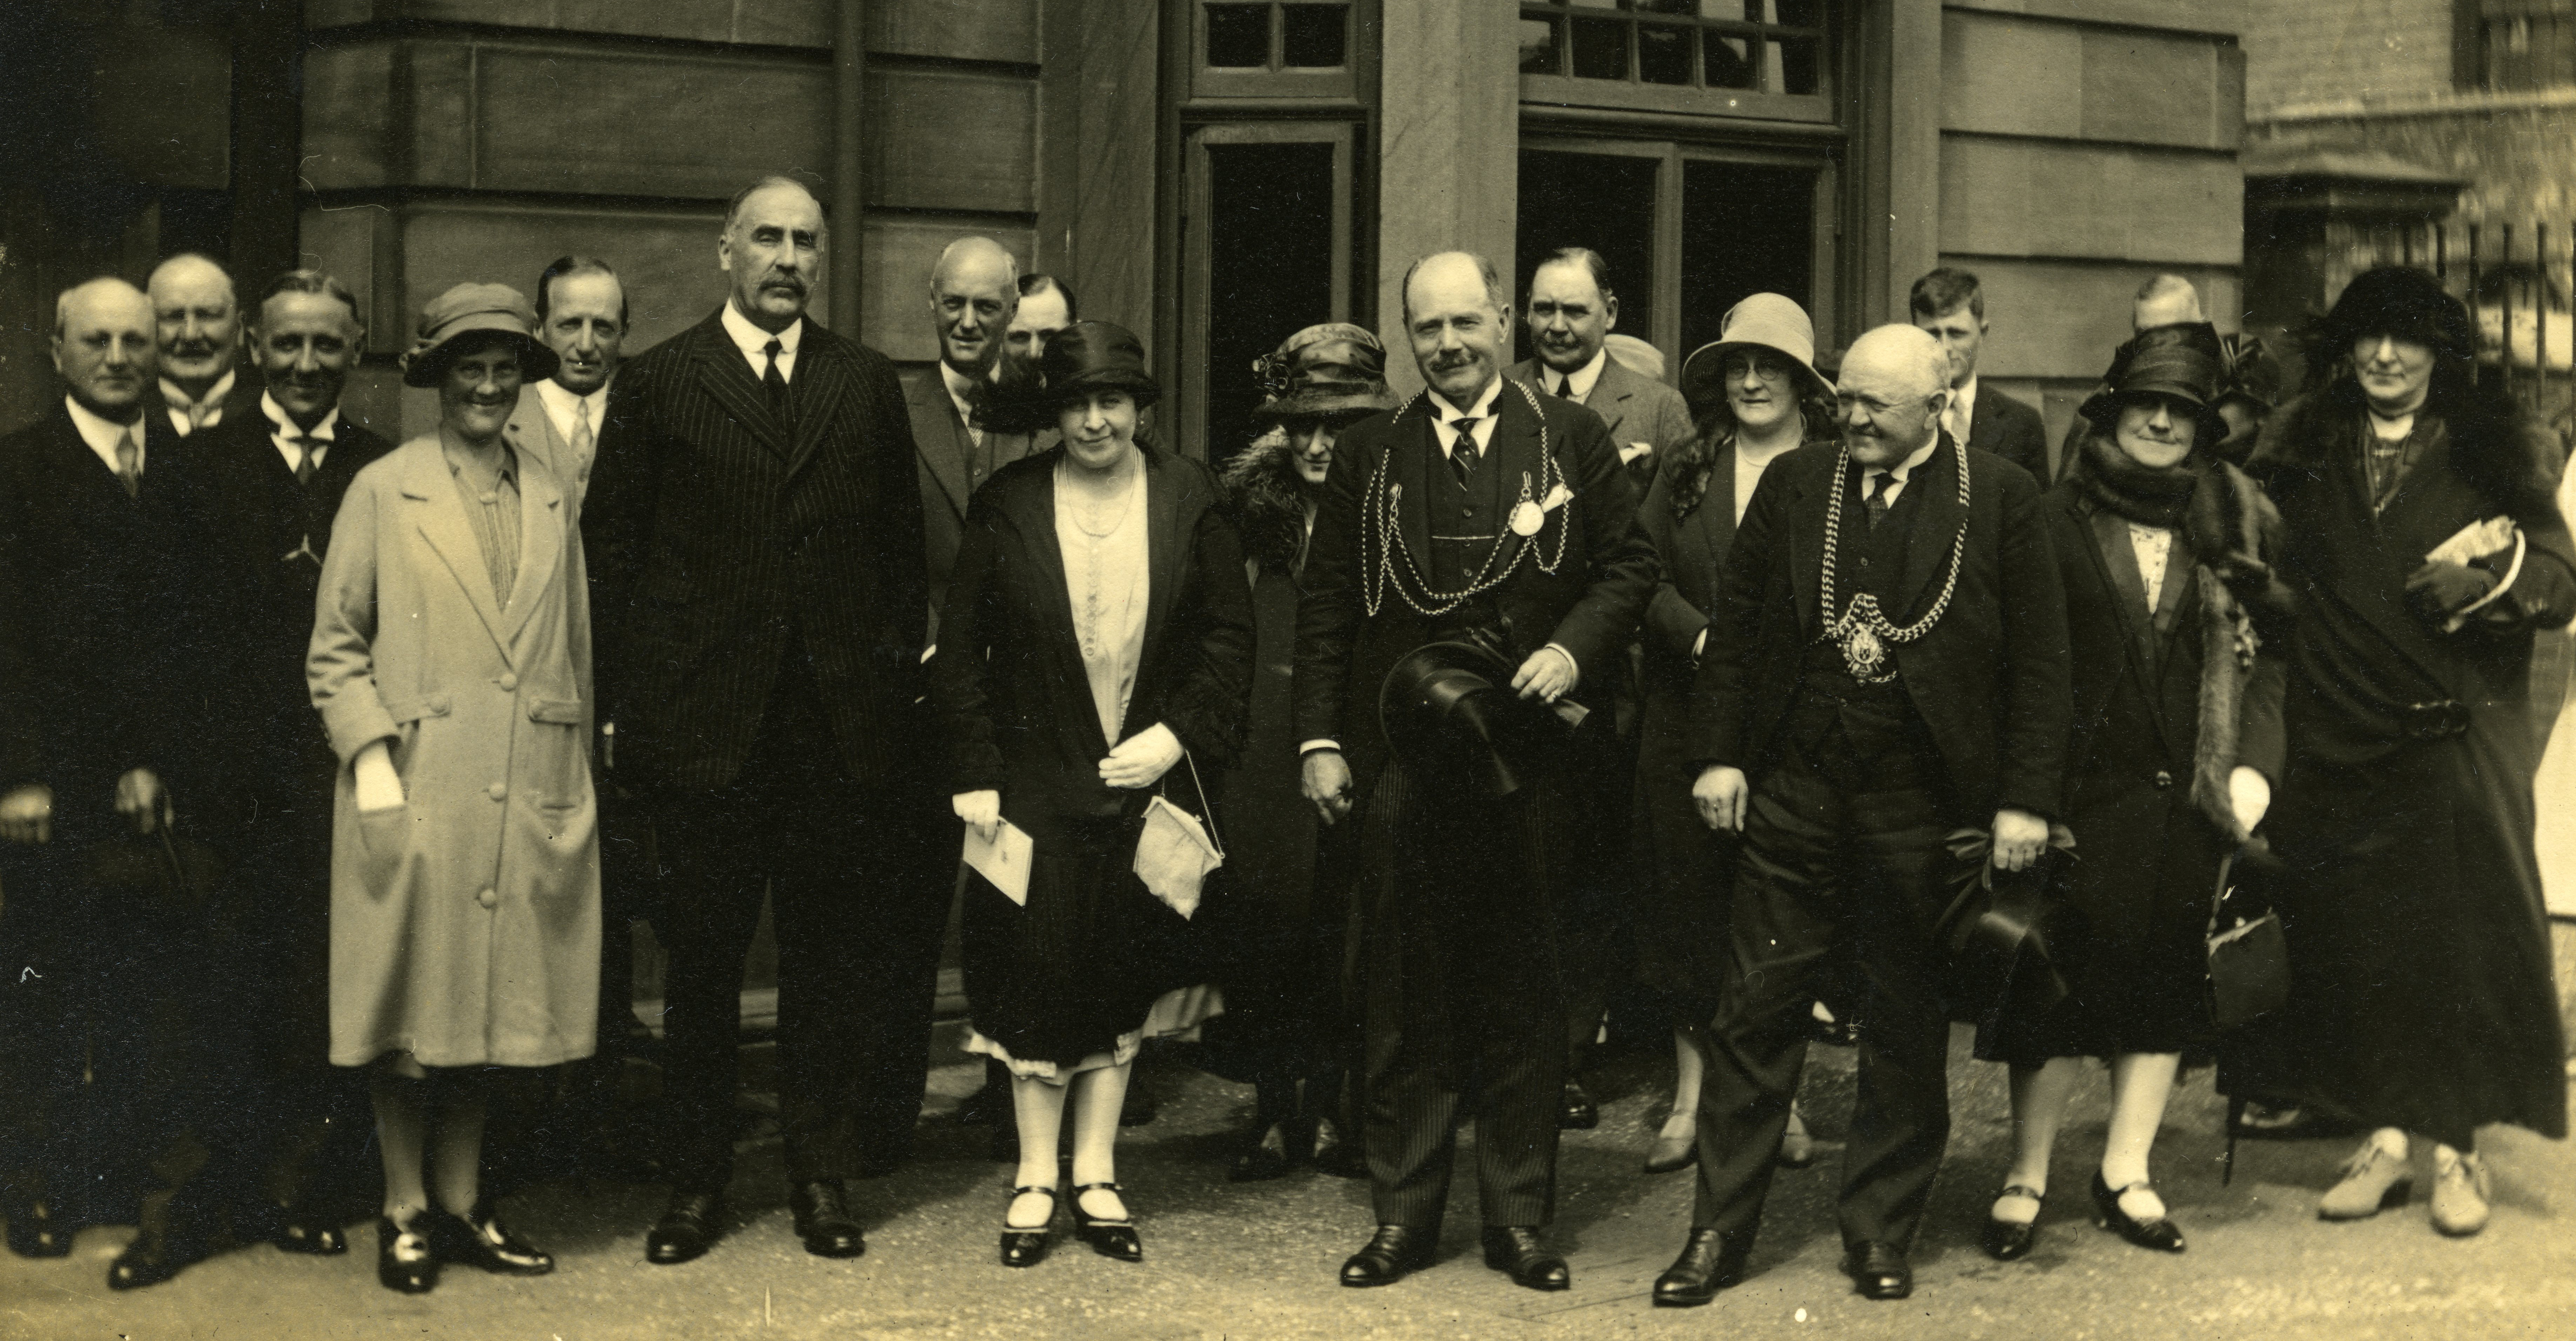 Teresa Merz stands among a group of well dressed people in an old photo from the 1920s